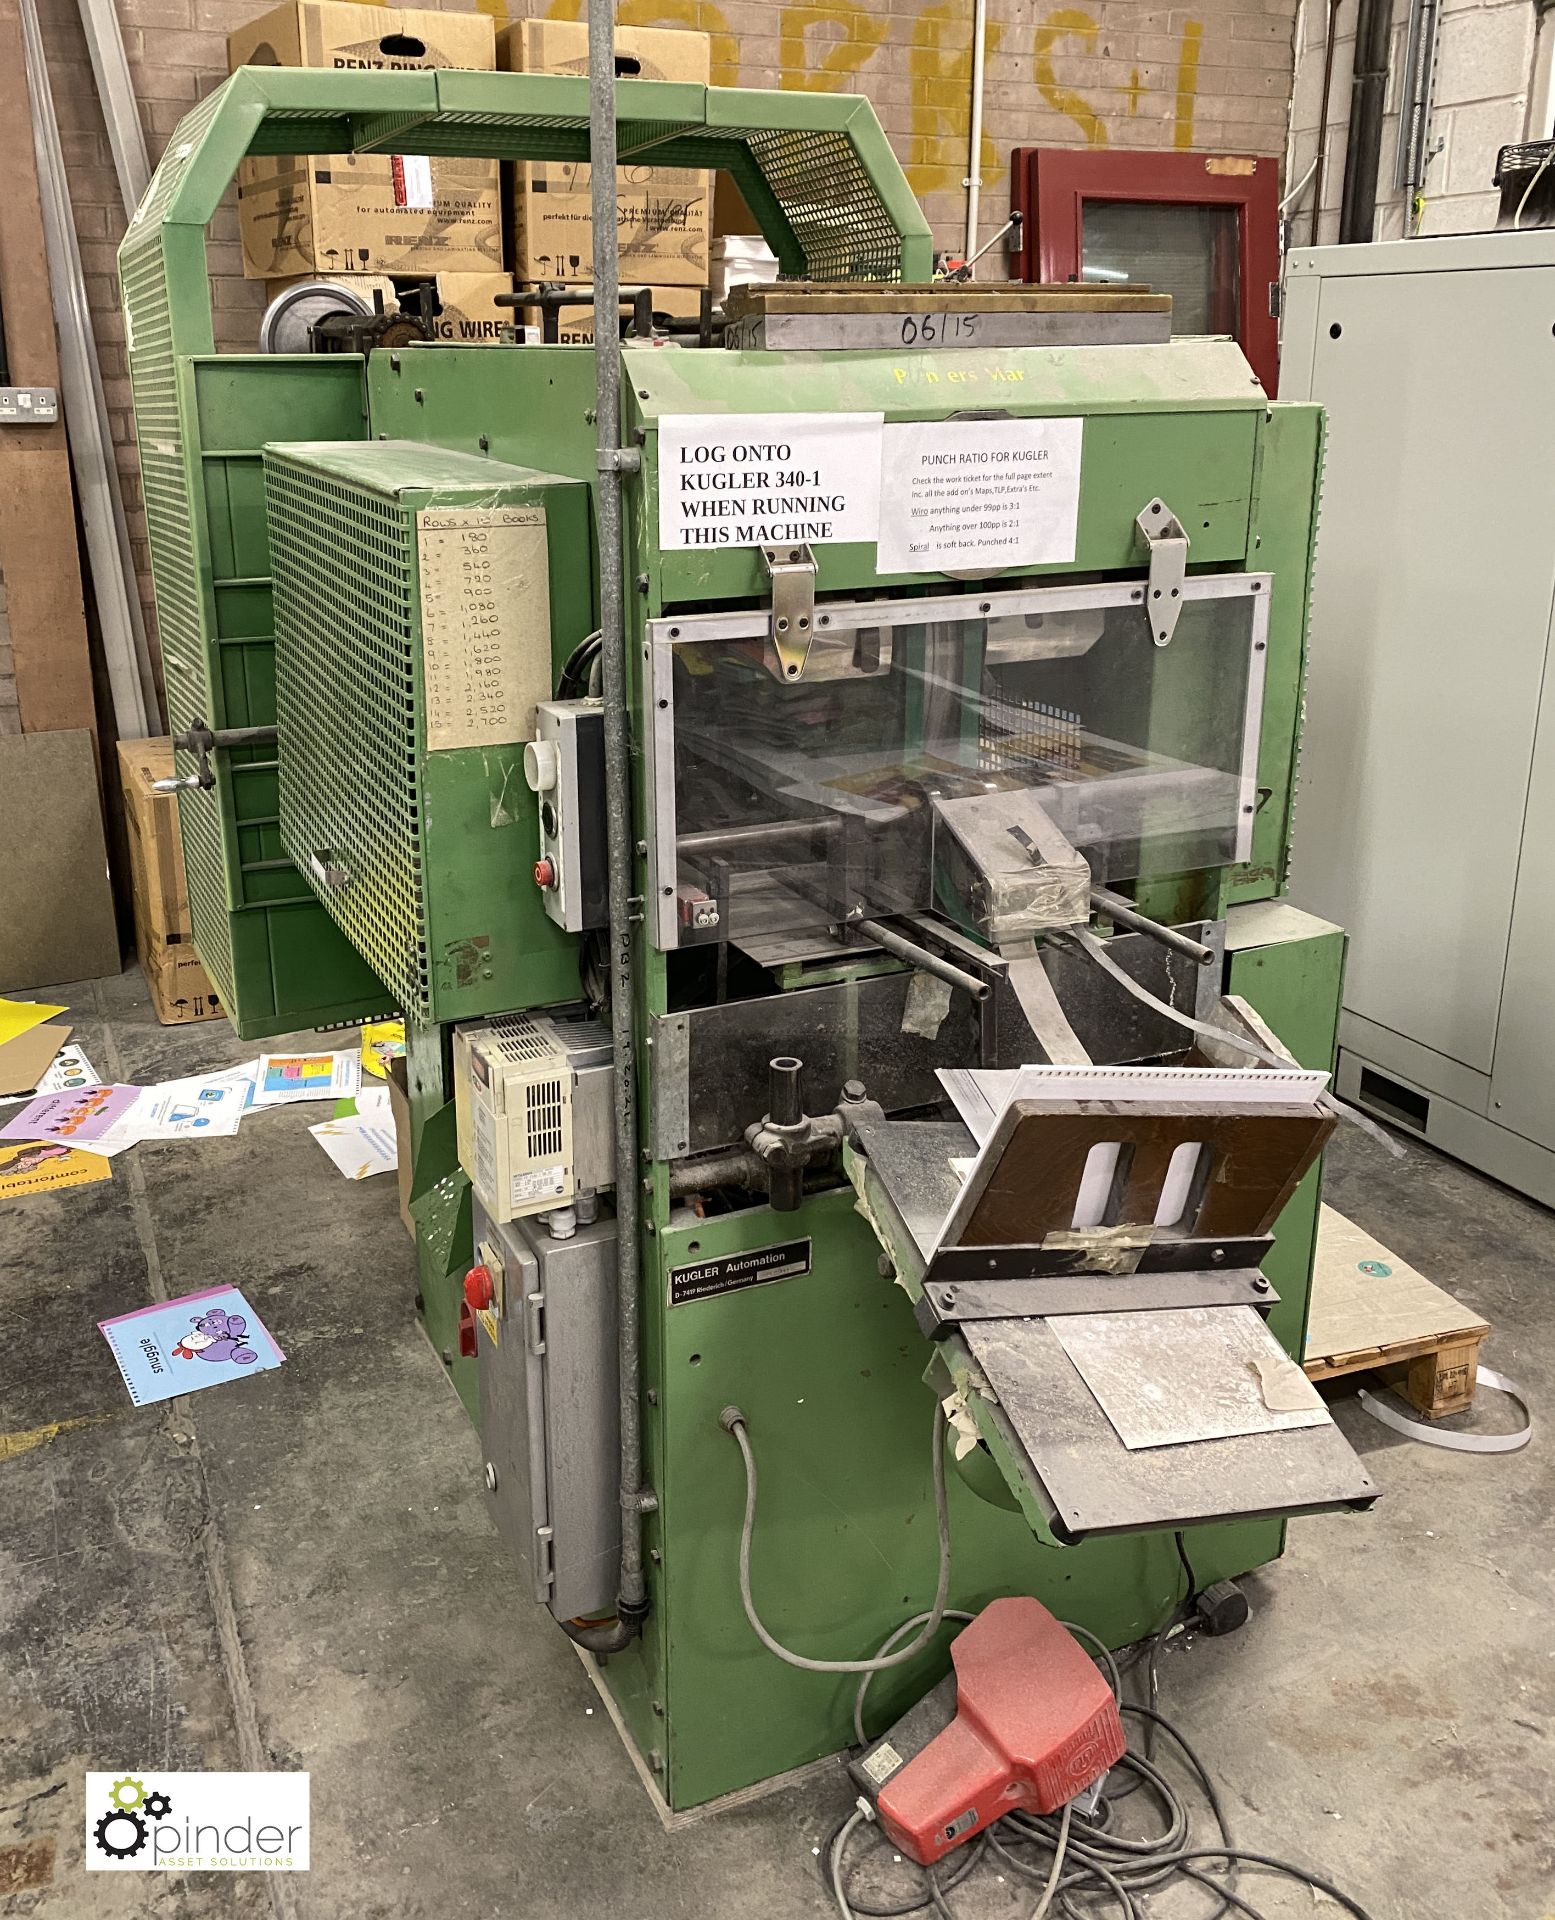 Kugler 340-1 automated high speed Hole Punch, serial number 496-340 (located a separate Wakefield